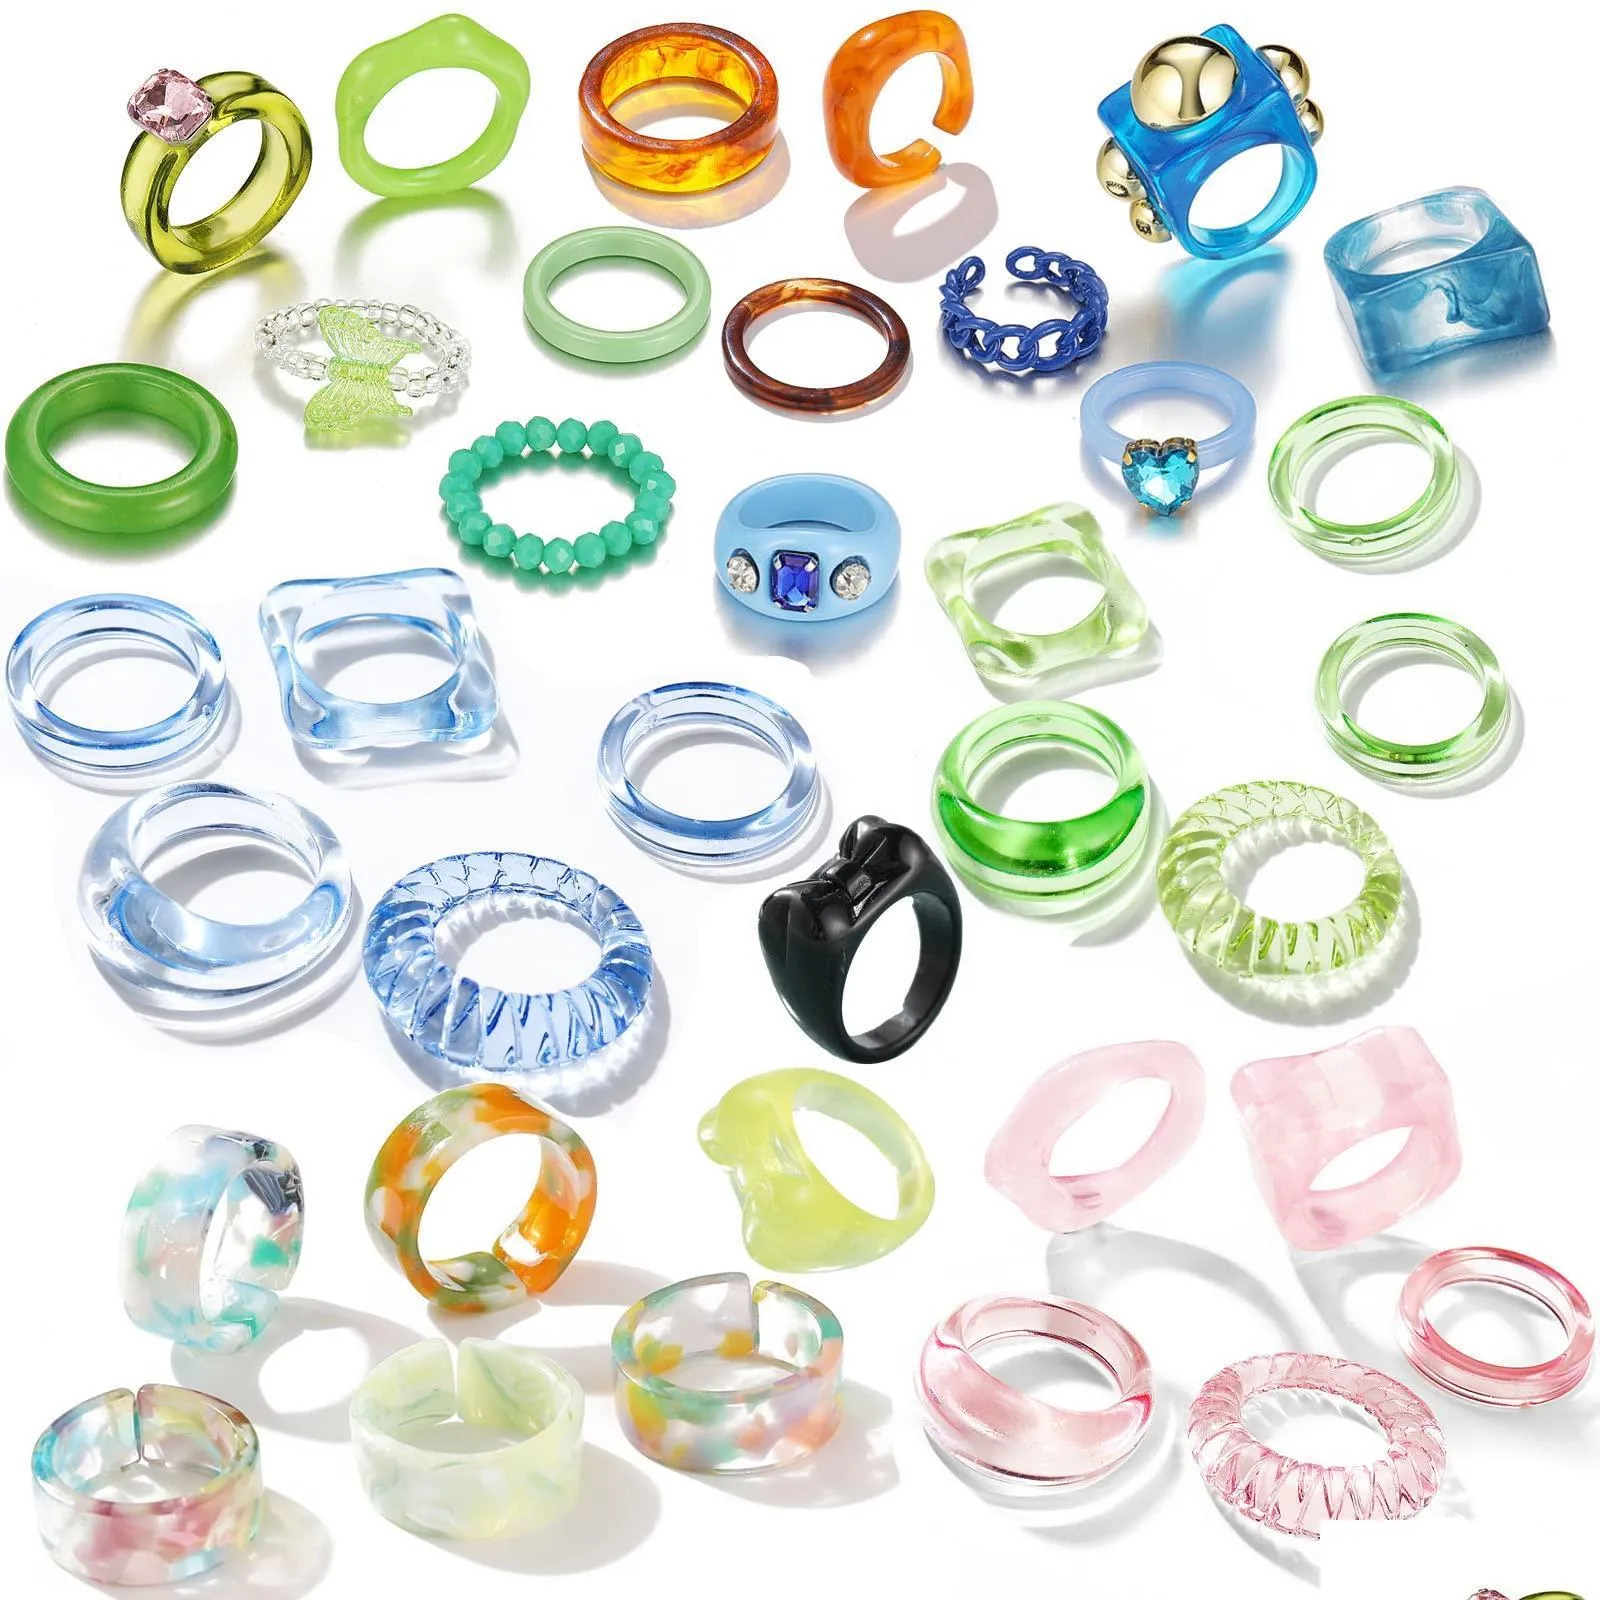 Band Rings Band Rings Resin Plastic Acrylic For Women Teen Girls Chunky Aesthetic Trendy Colorf Cute Stackable Jewelry Bk Statement Otfso